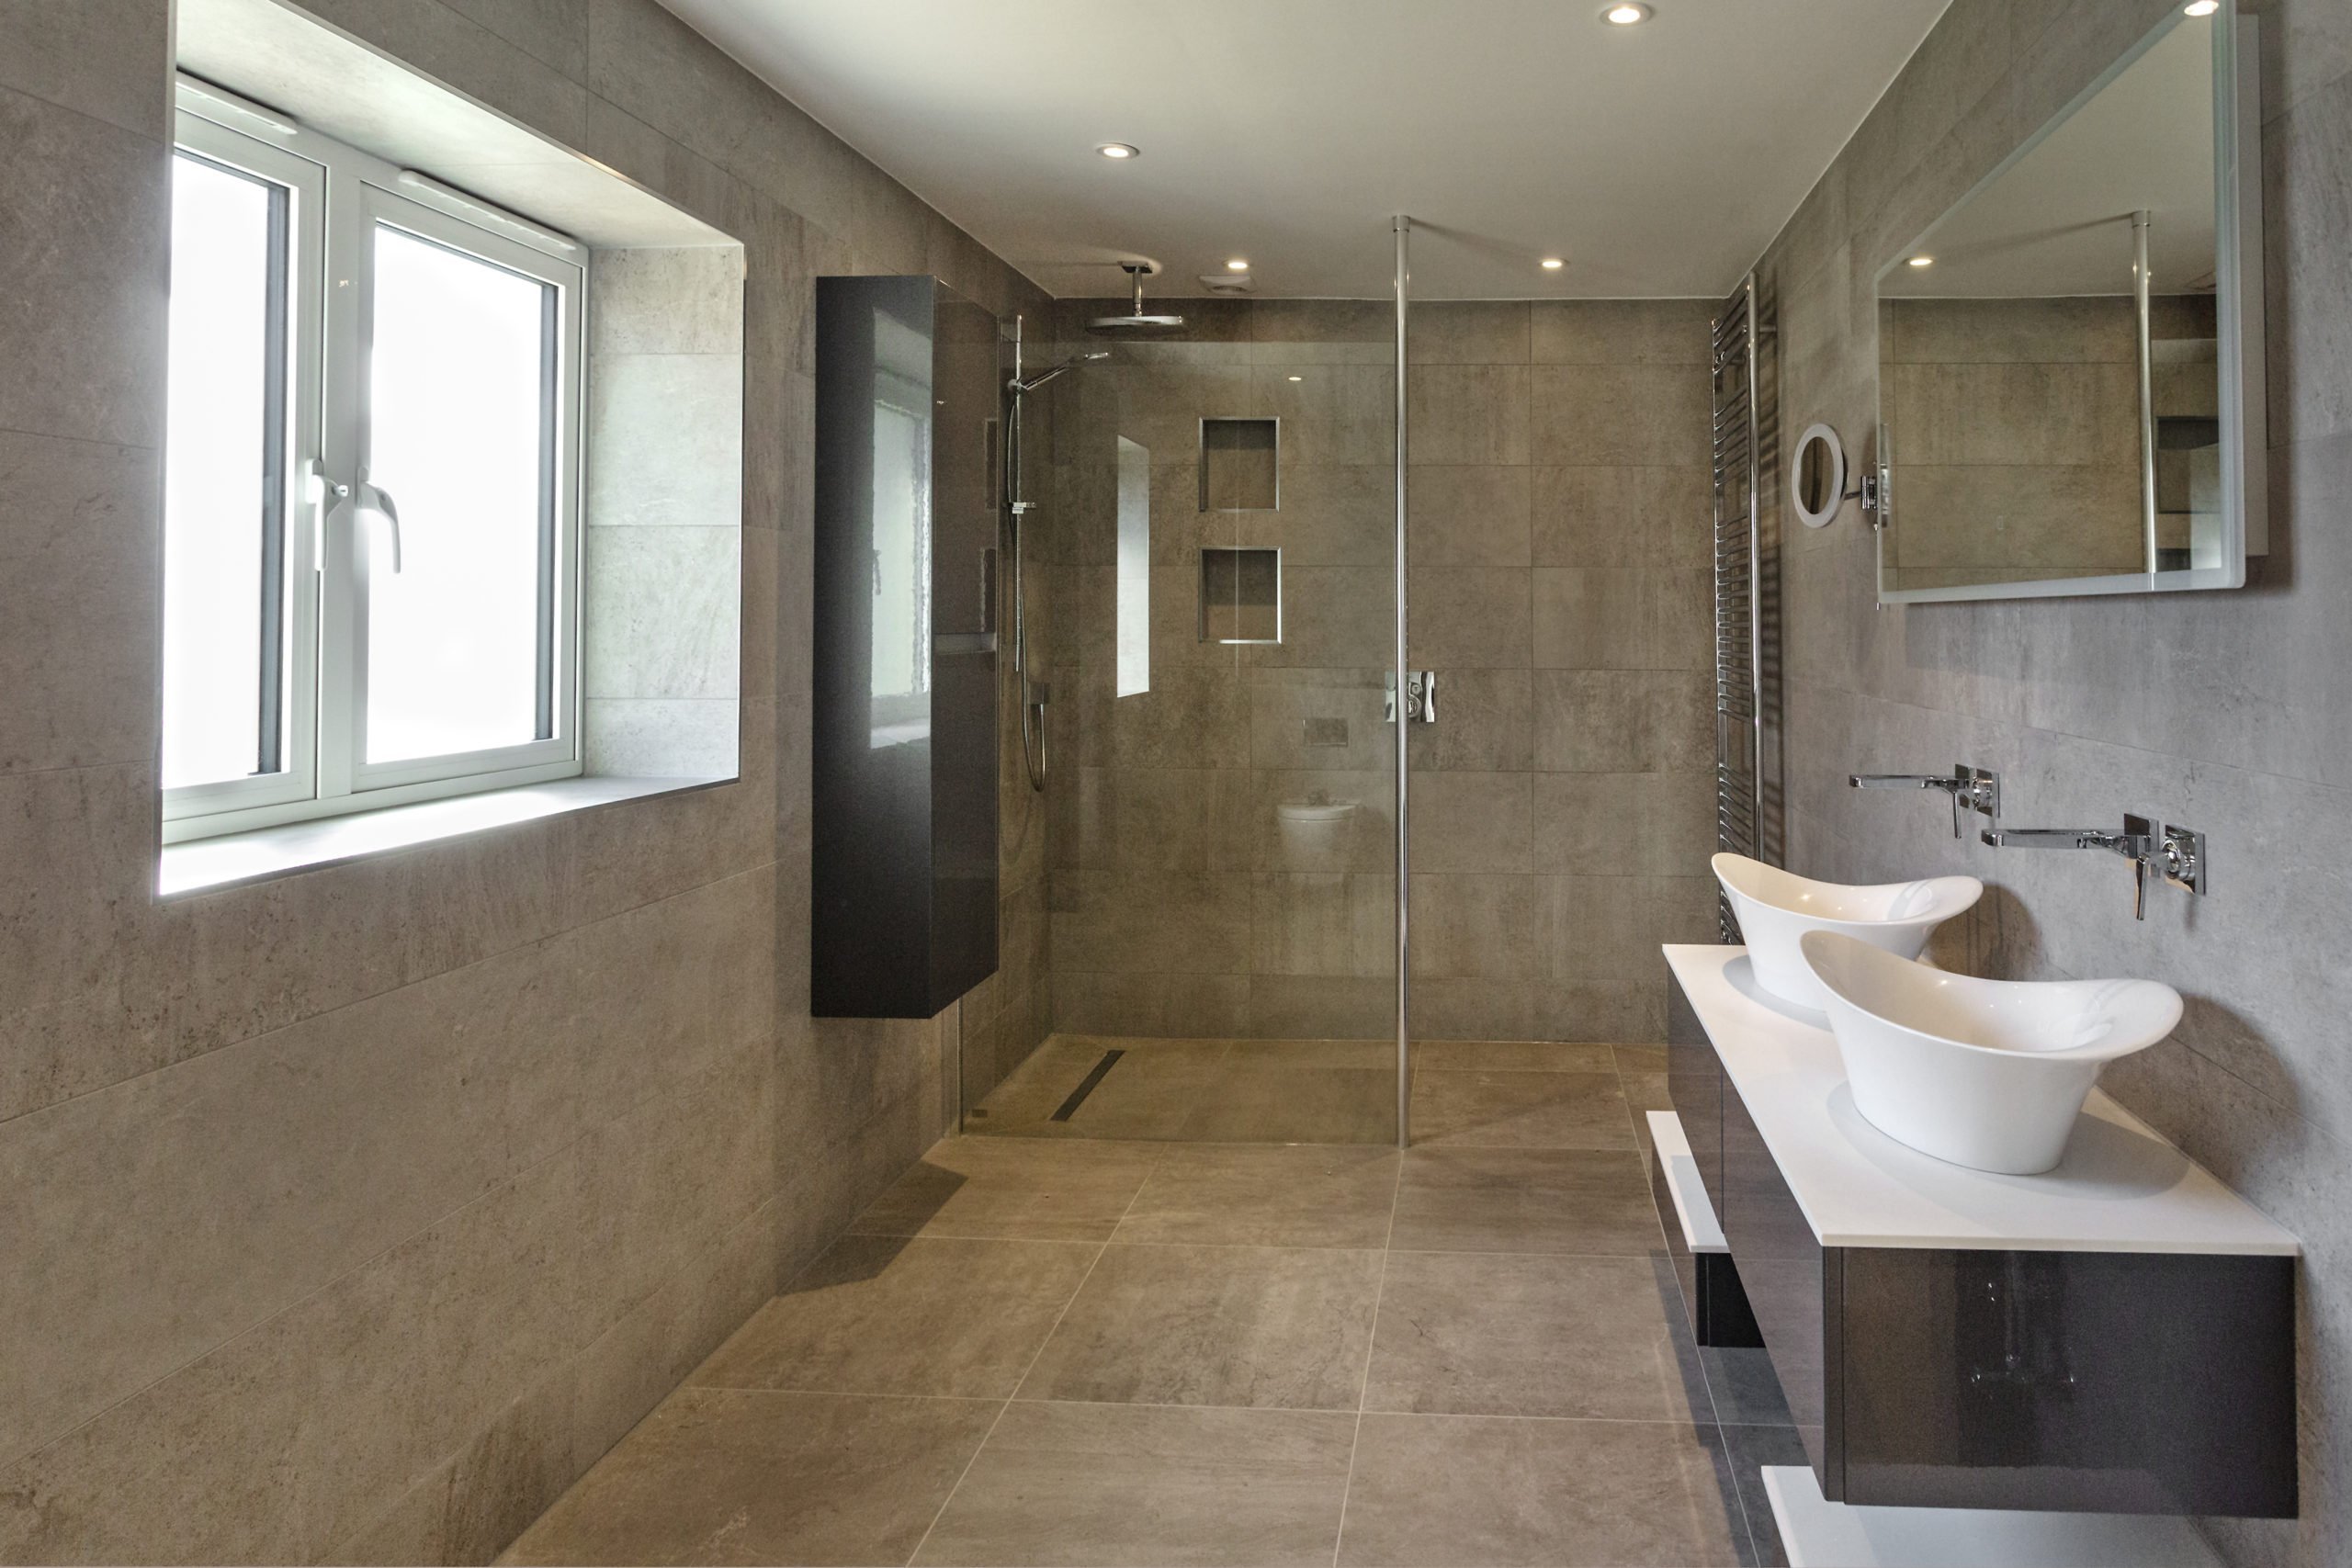 Walk-in wet room in natural stone